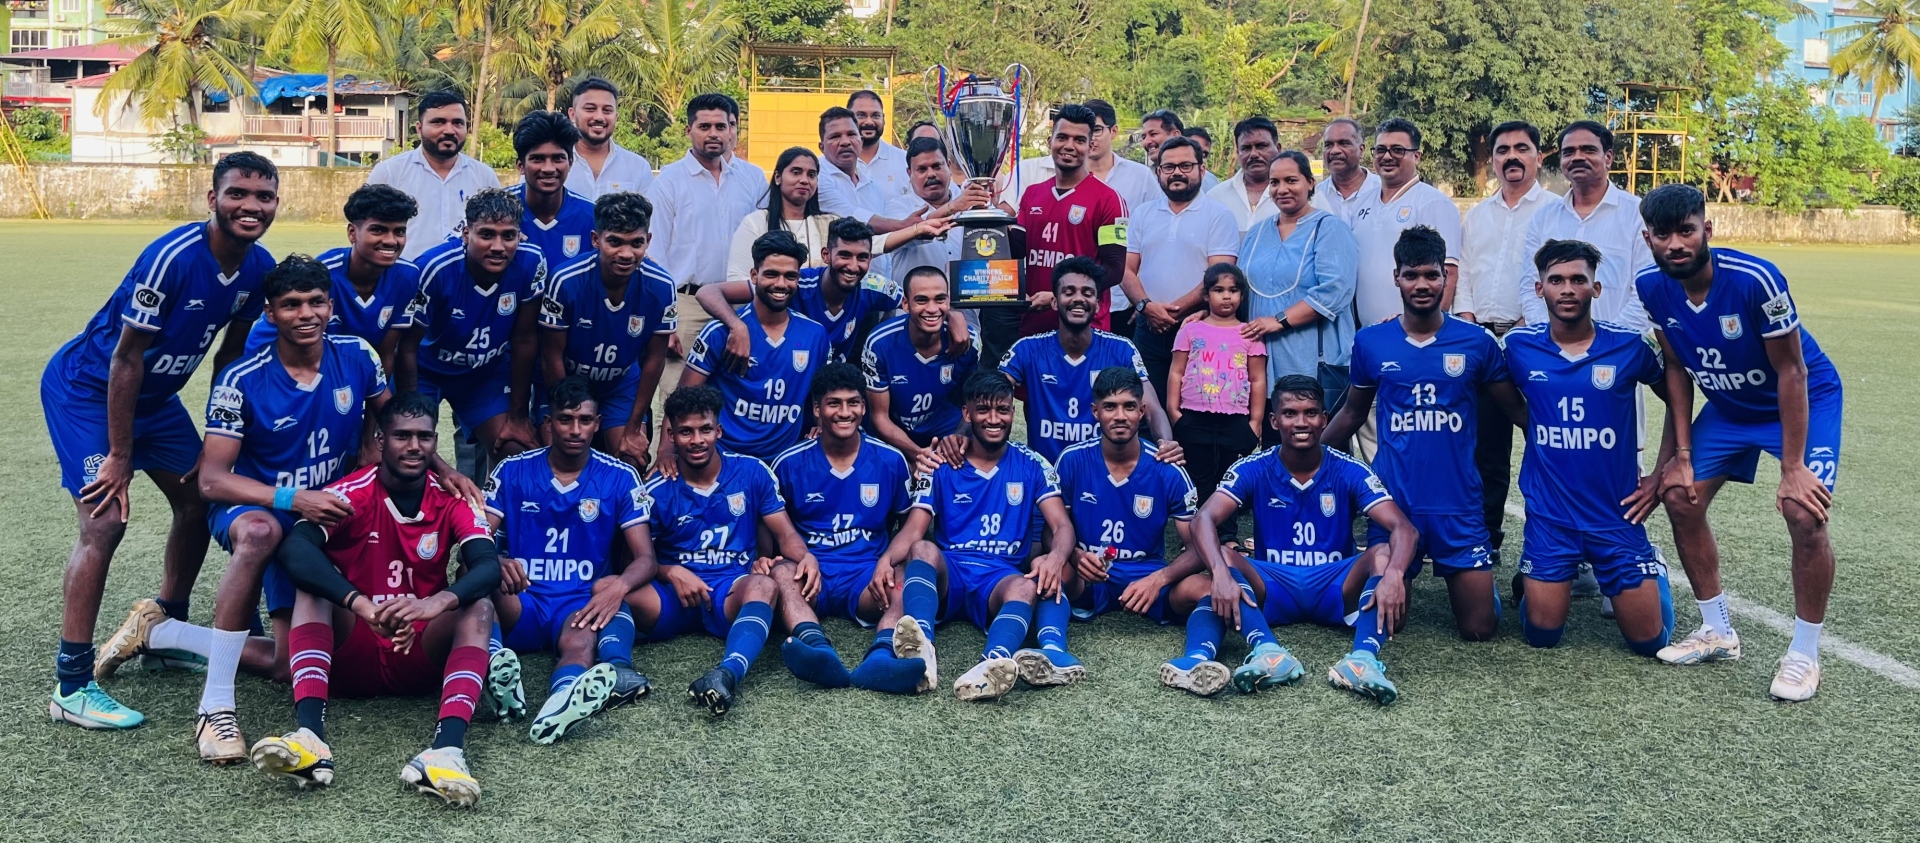 Dempo blank Sporting Clube 3-0 in GFA Charity Match